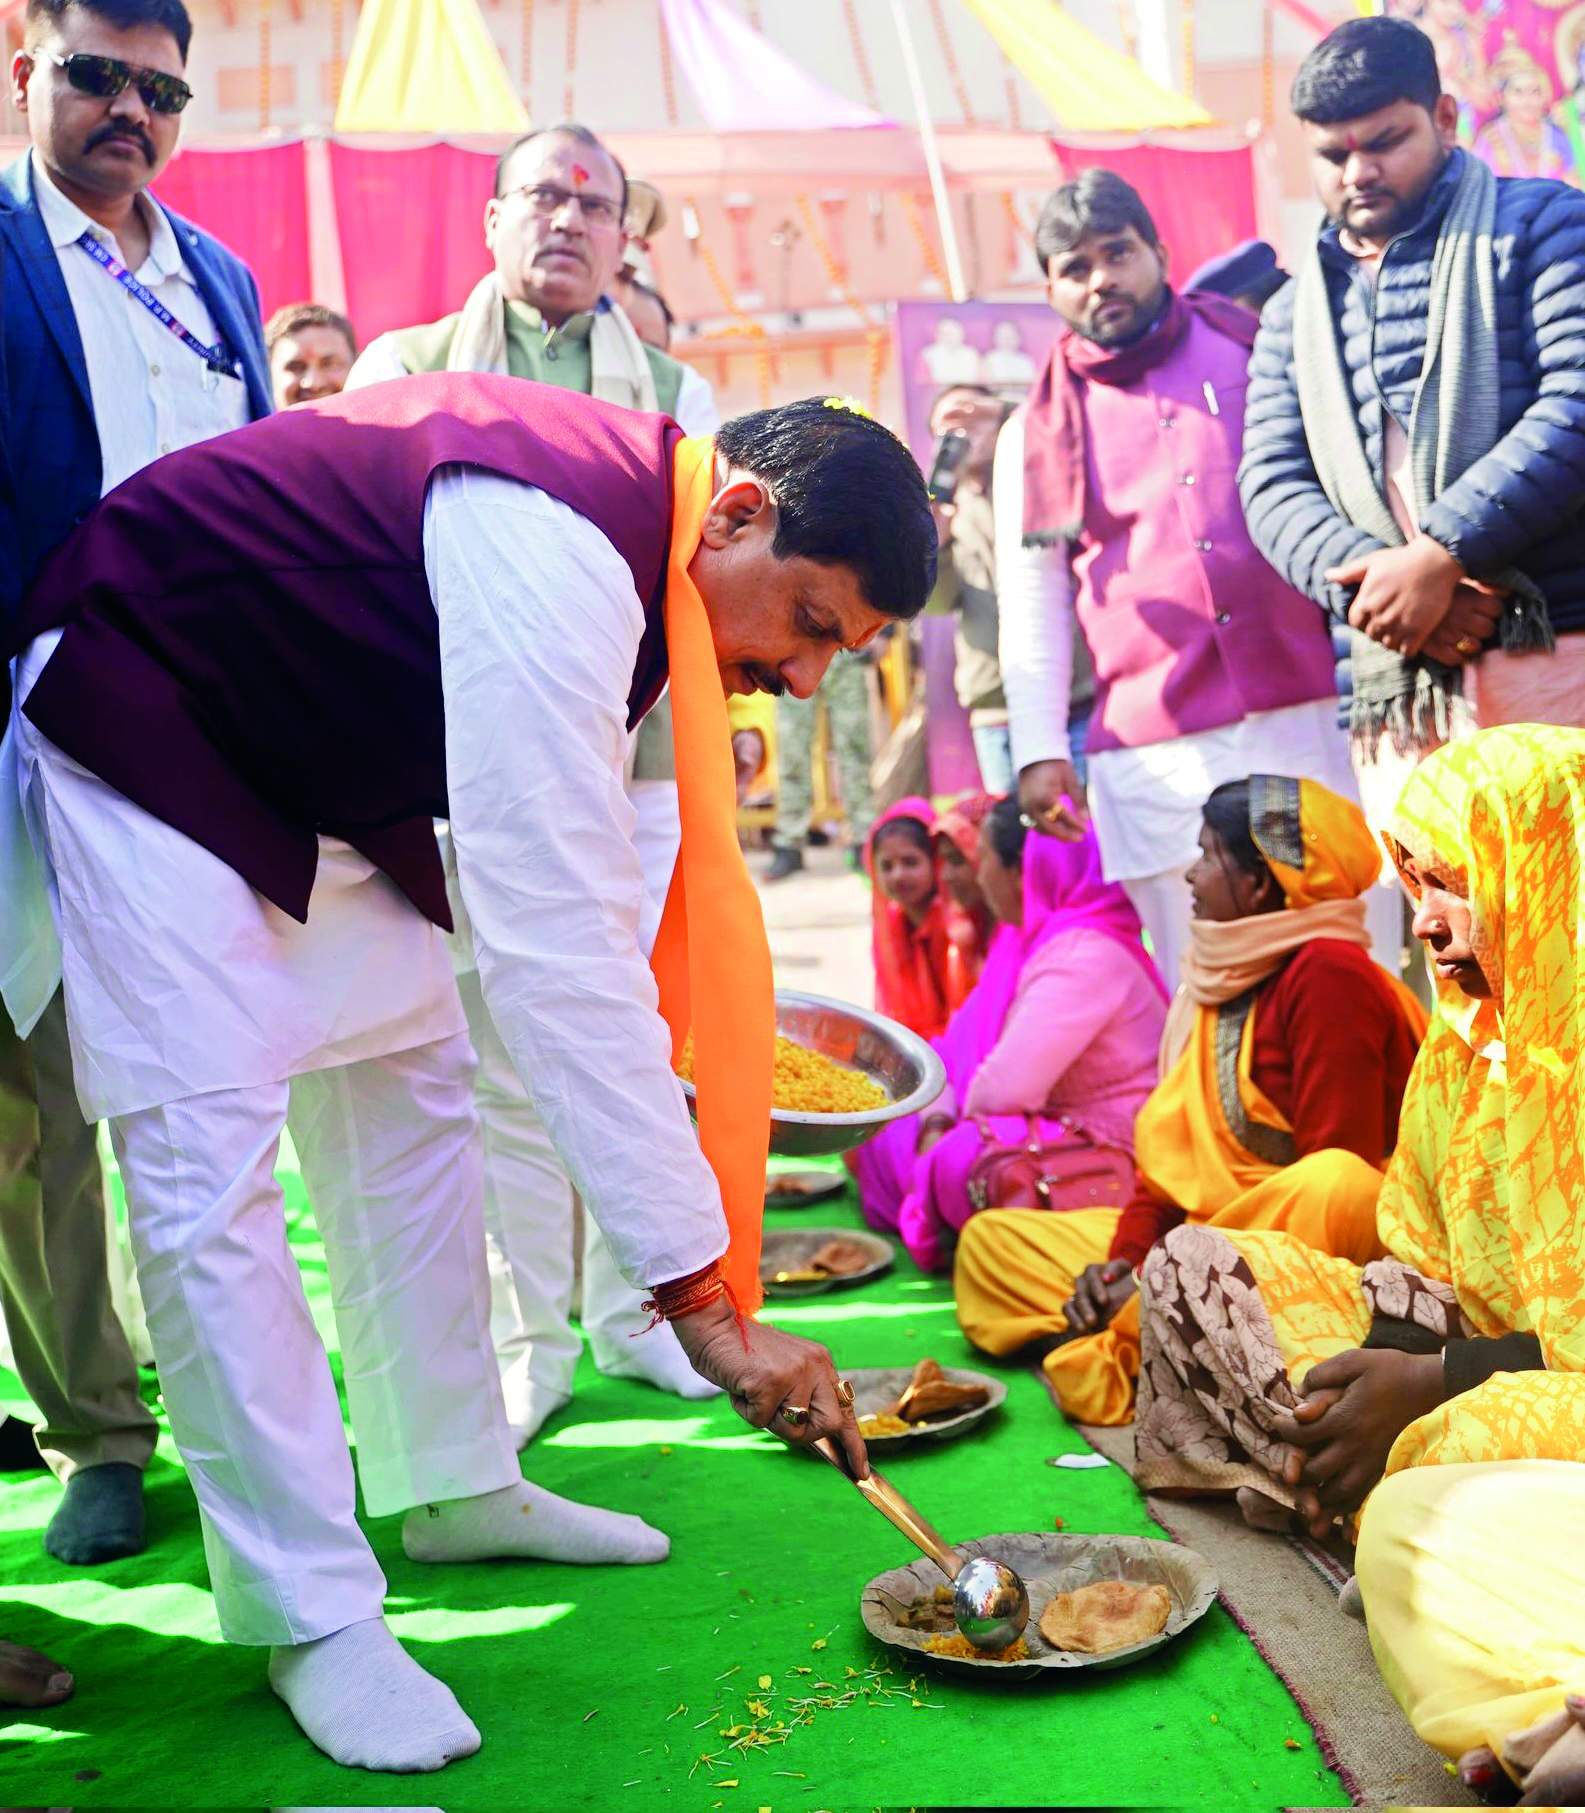 MP CM Yadav performs puja, says waiting of countless Ram devotees ended today